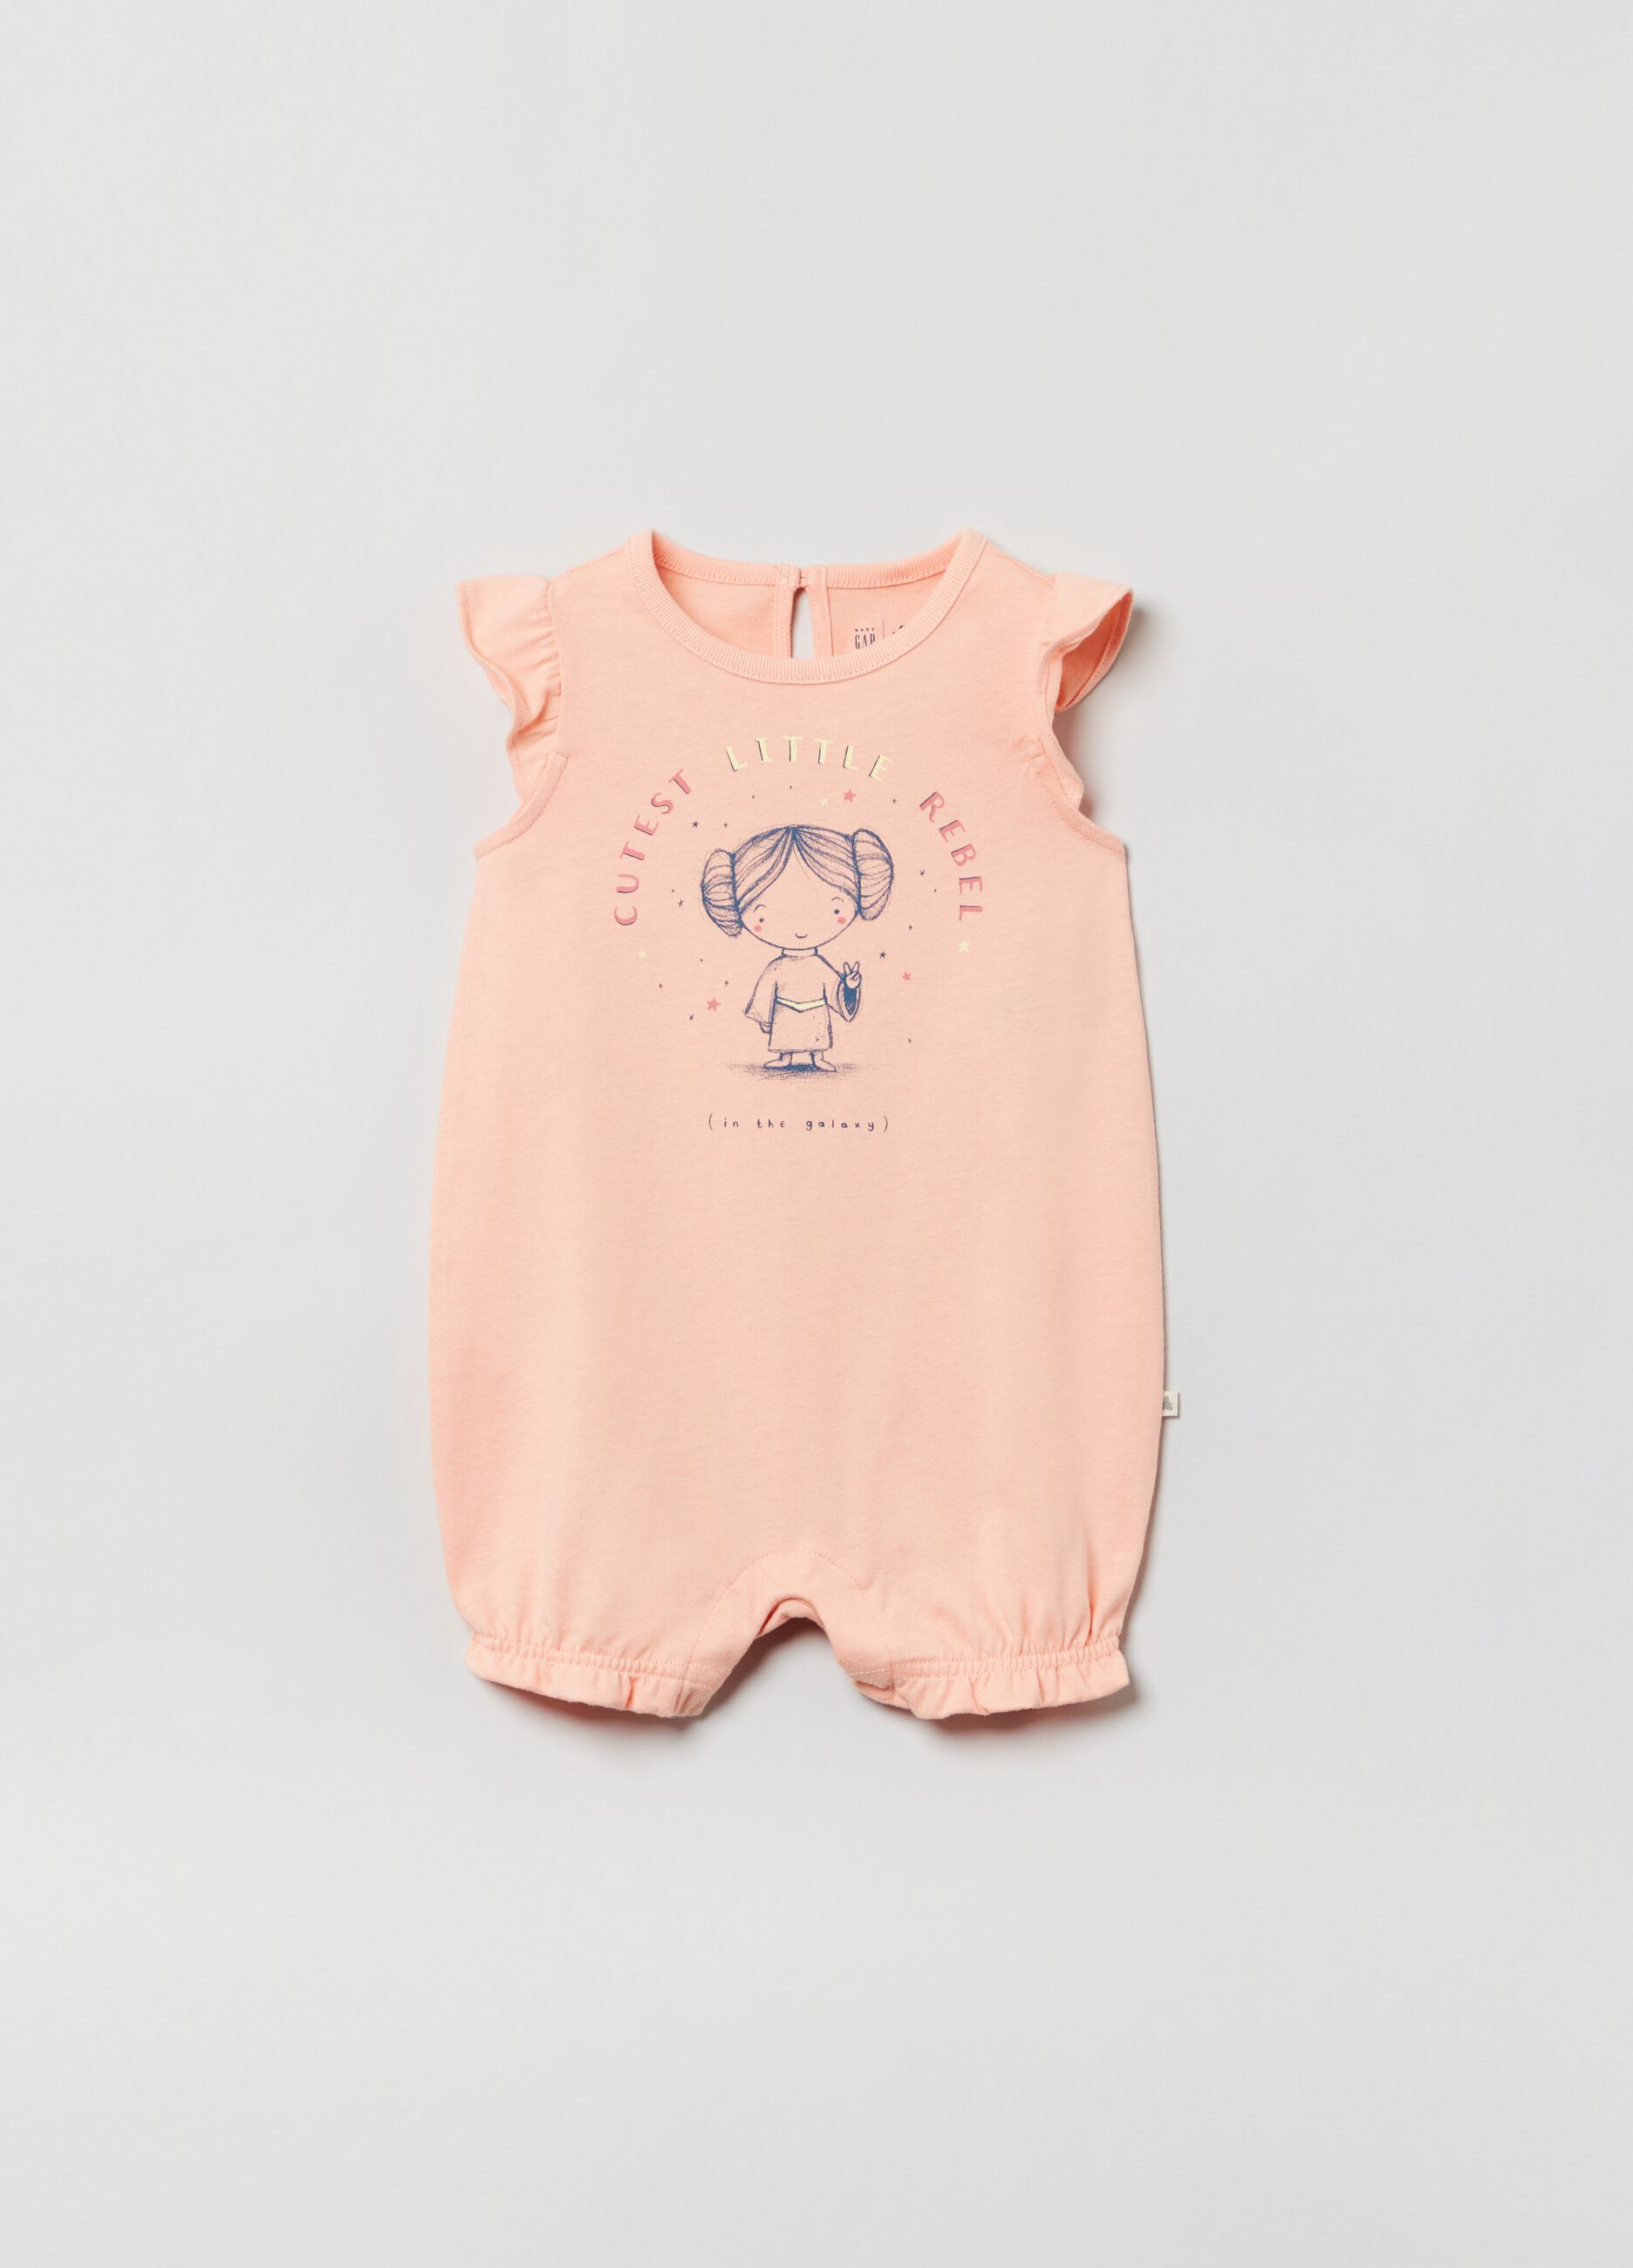 Sleeveless romper suit with print